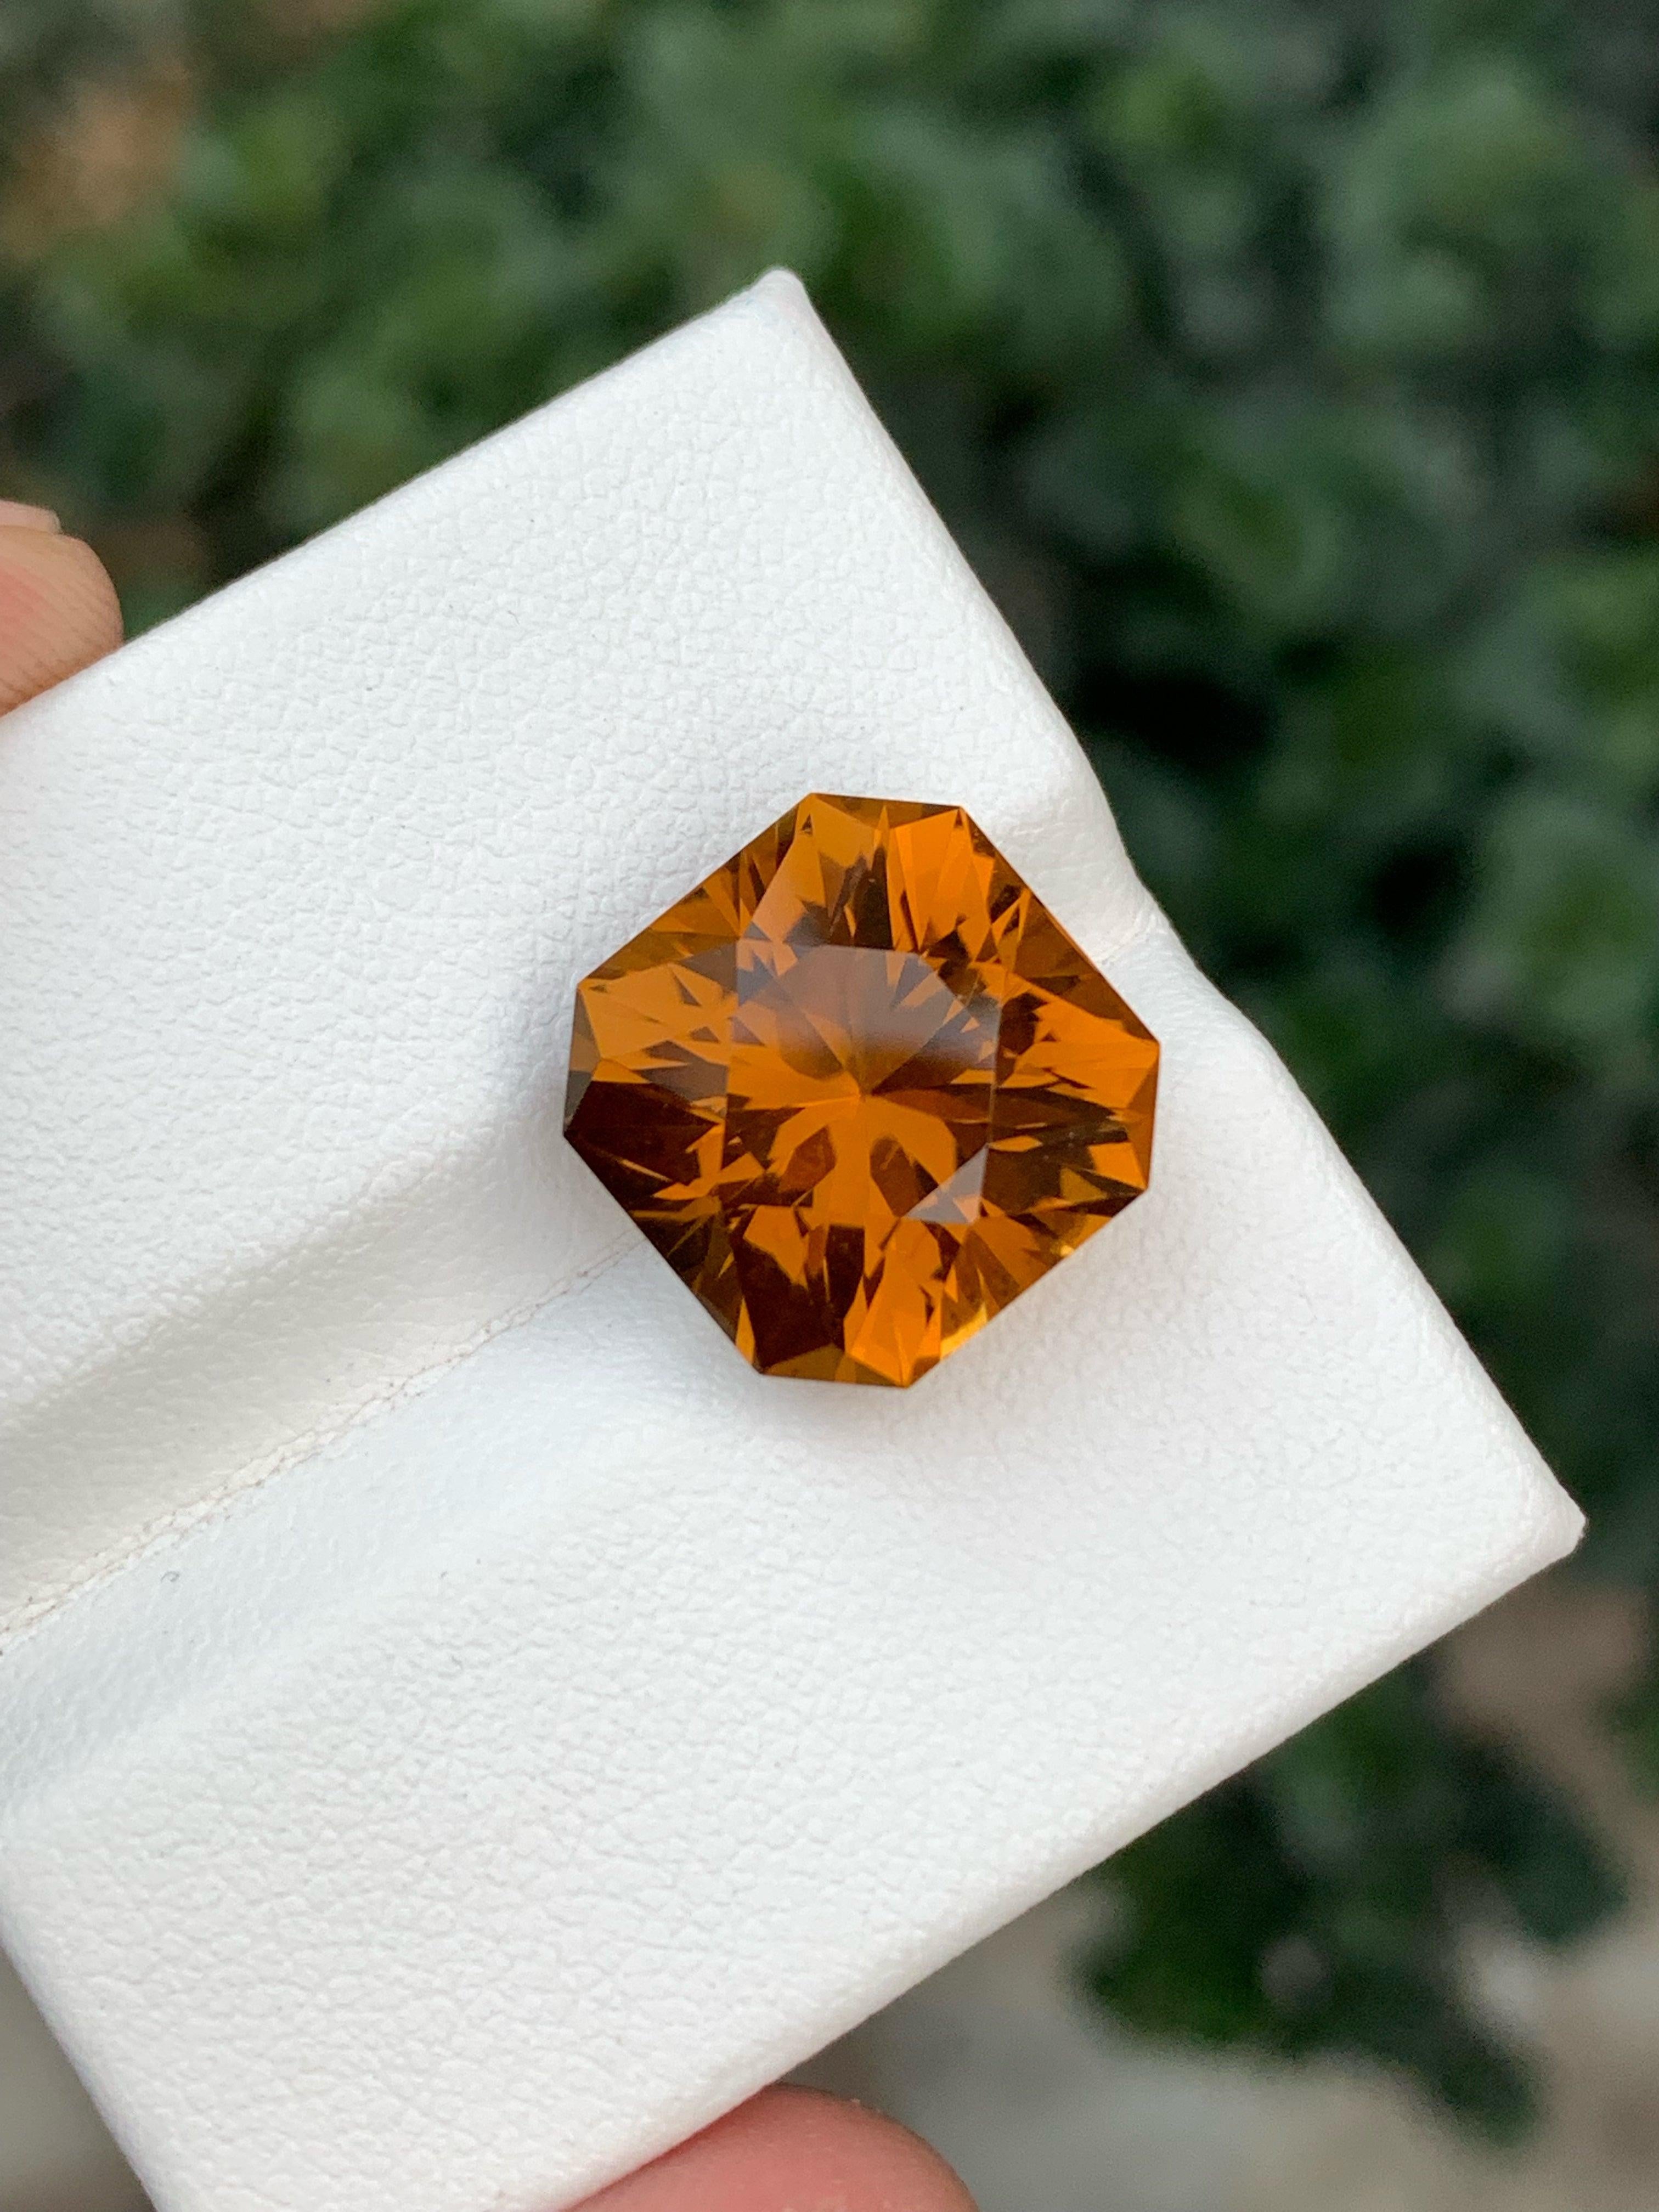 Exceptional Natural Citrine Gemstone, Available for sale at whole sale price natural high quality 12.15 Carats Eye Clean Loose Citrine From Africa.

Product Information:
GEMSTONE TYPE:	Exceptional Natural Citrine Gemstone
WEIGHT:	12.15